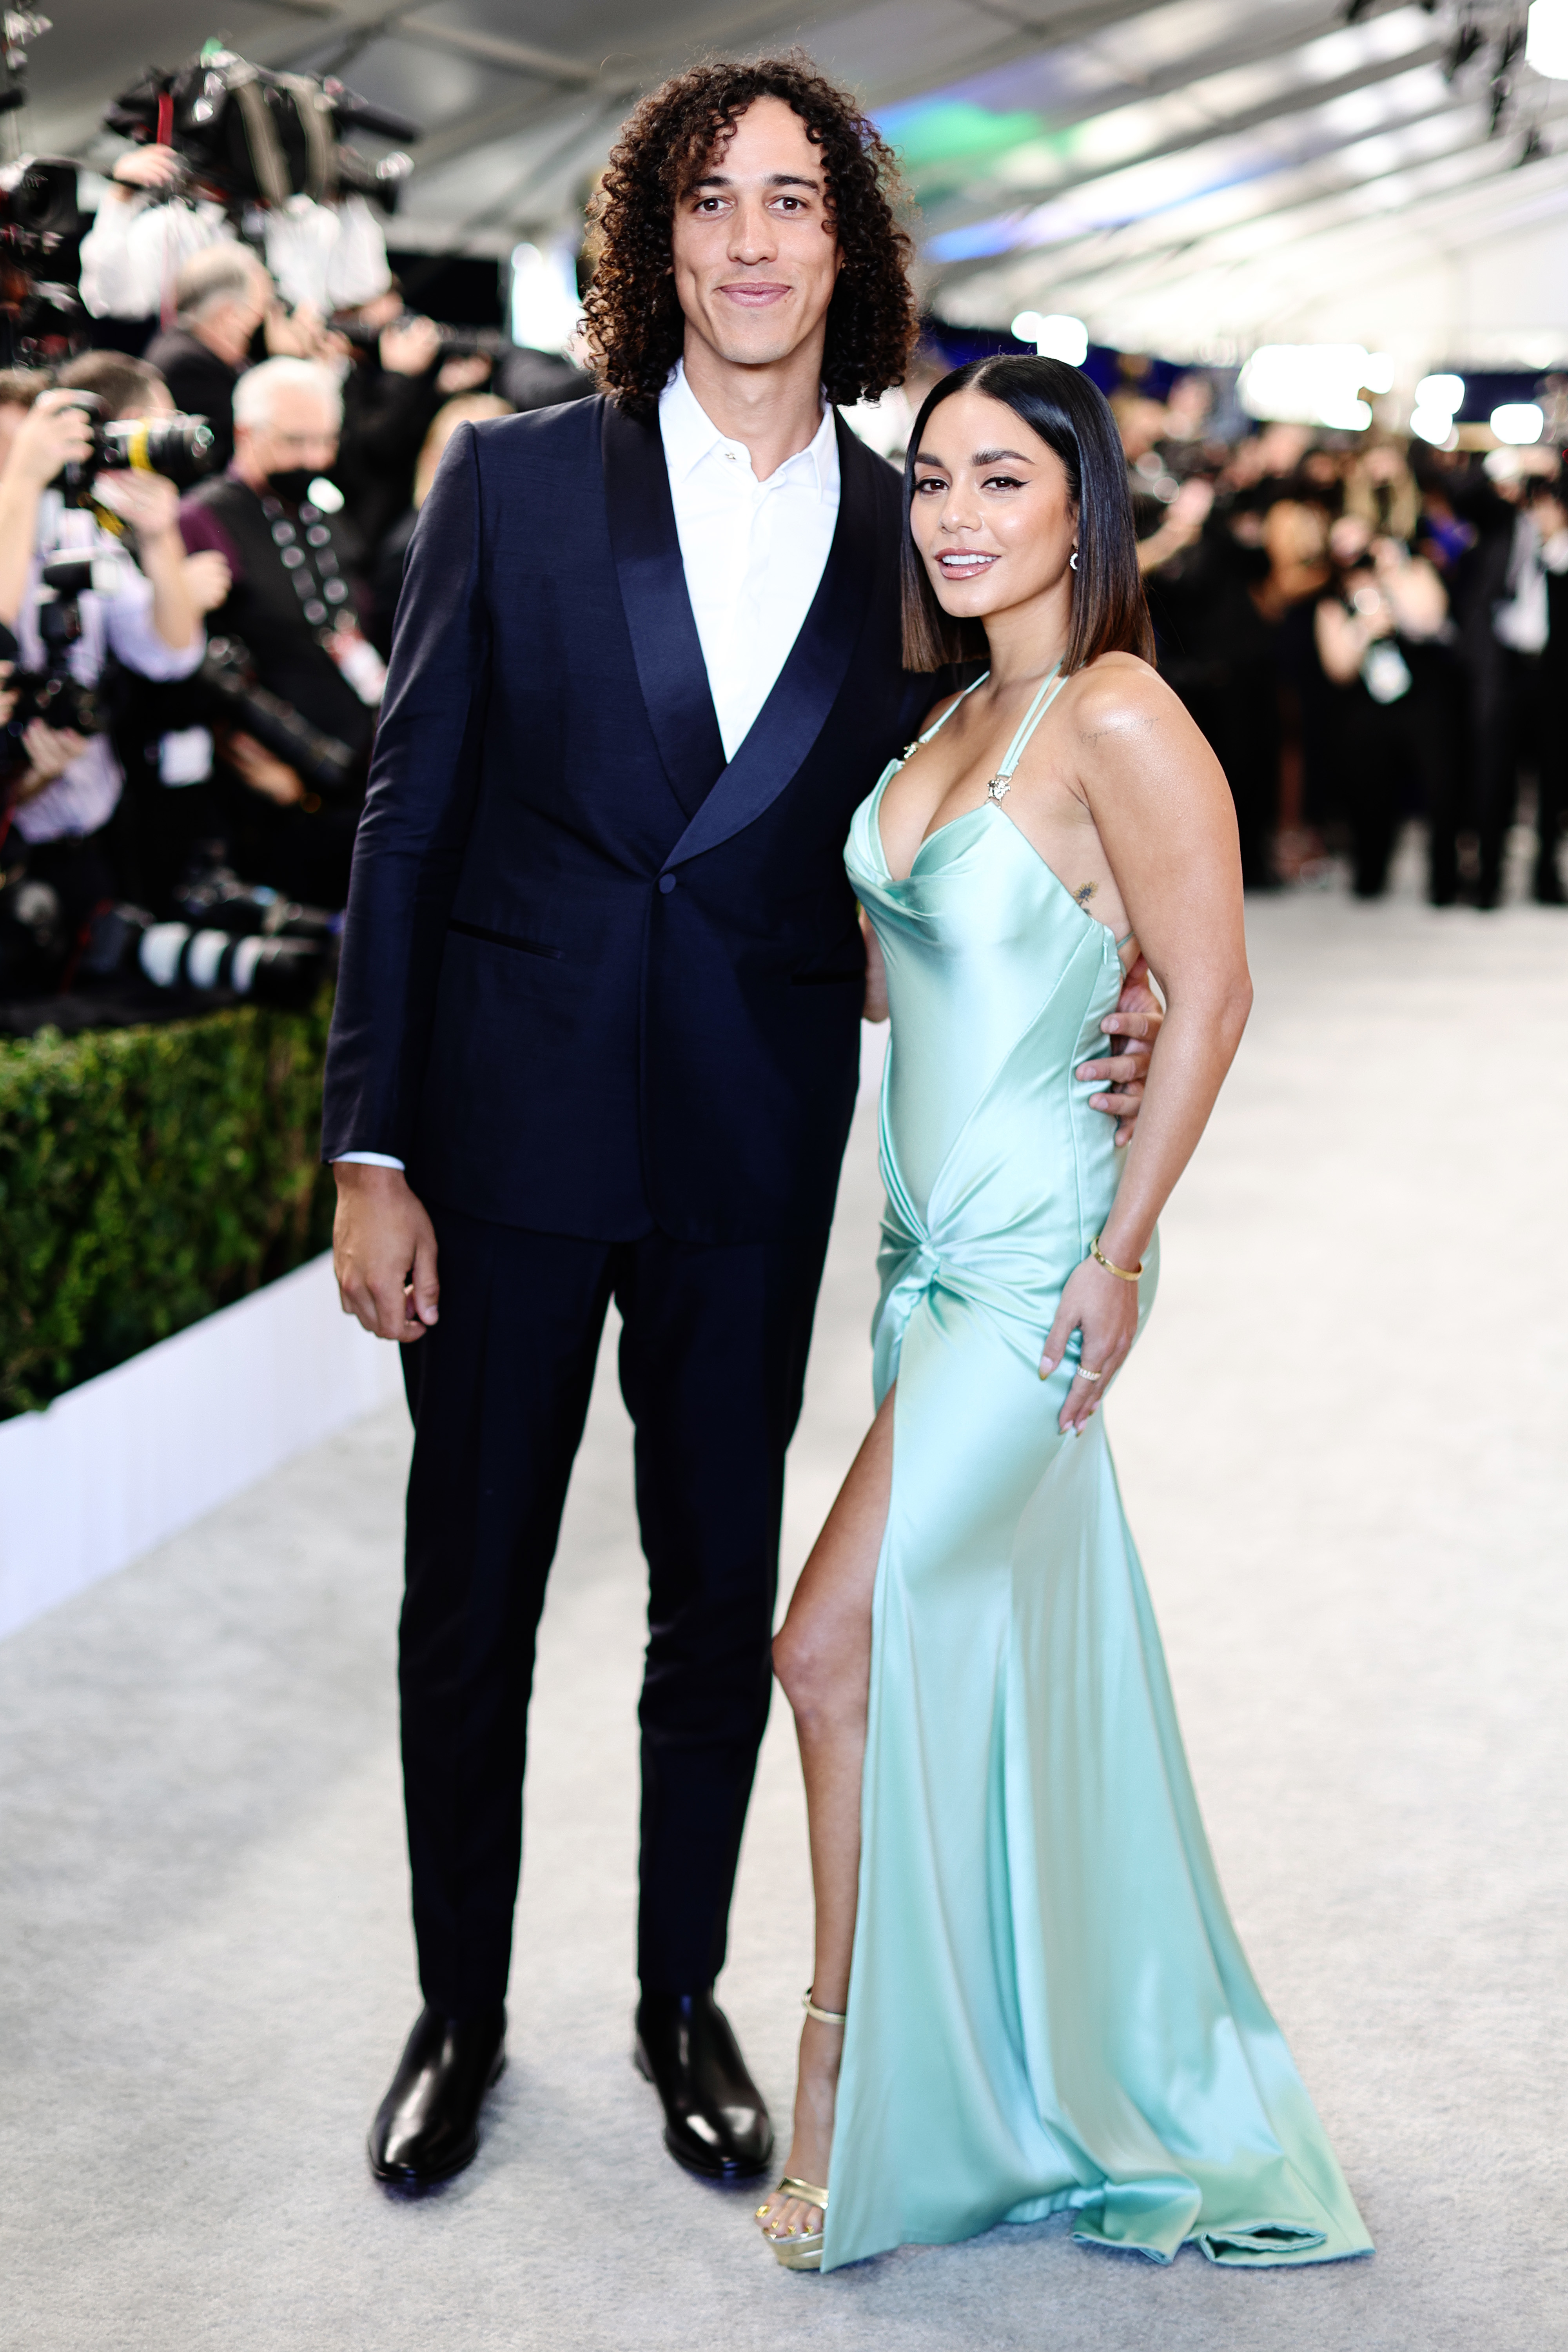 Cole in a tuxedo and Vanessa Hudgens in a stylish, form-fitting satin gown with a thigh-high slit pose on a red carpet